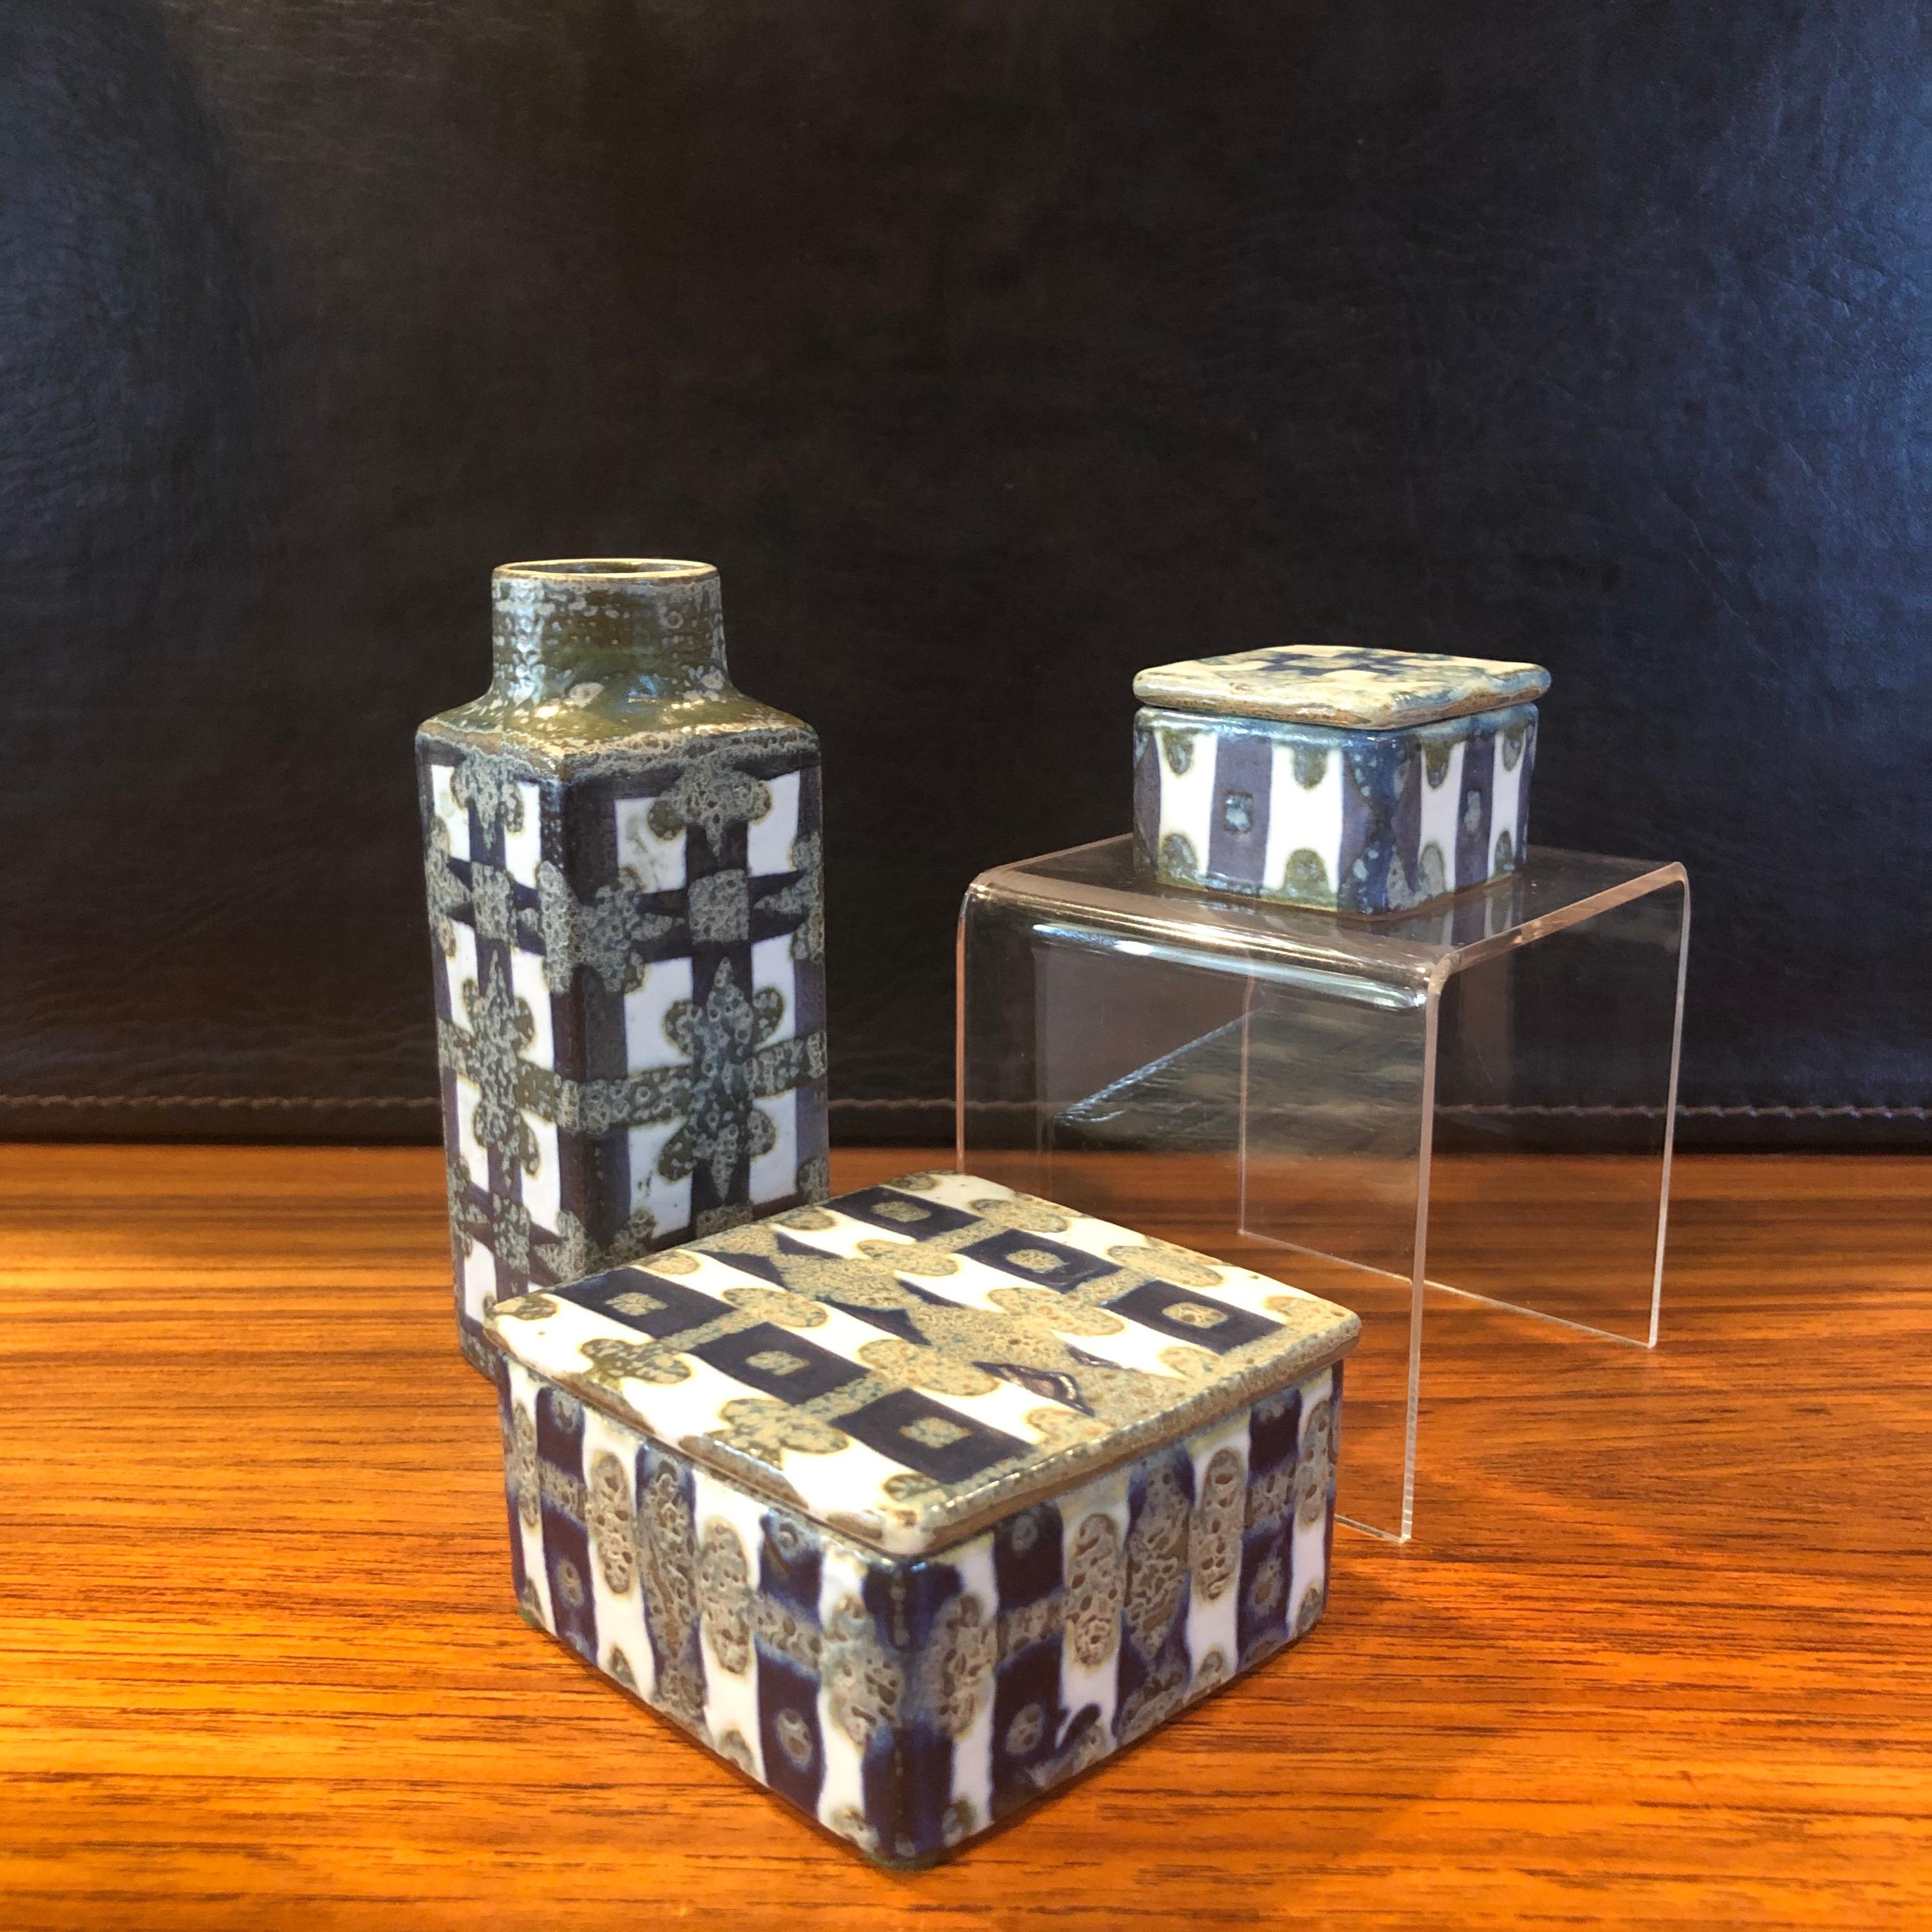 Wonderful Fajance three-piece vase and lidded box set from the Baca line by Nils Thorsson for Royal Copenhagen, circa 1960s. The grey, white and navy blue glazed stoneware containers with geometric abstract design was designed by Royal Copenhagen's